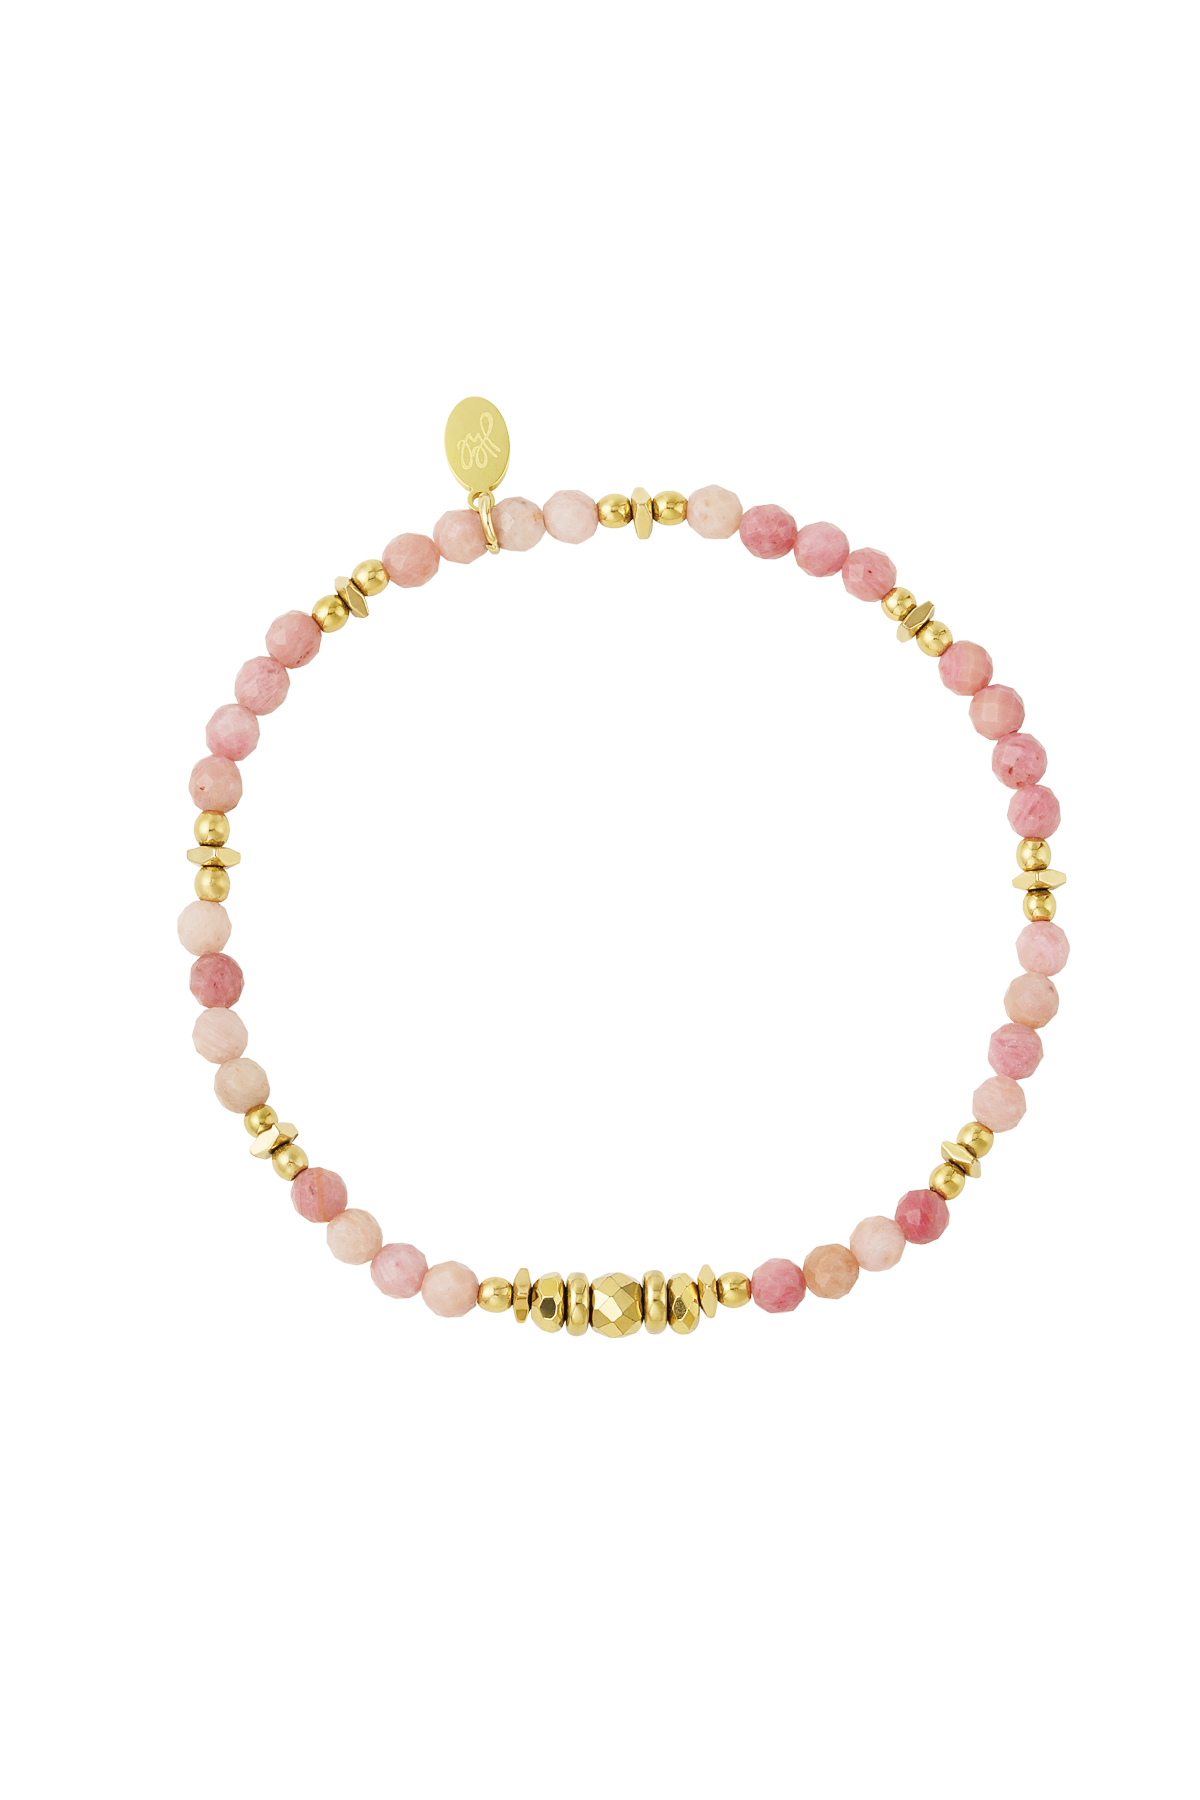 Beaded bracelet color - gold/pink Stainless Steel